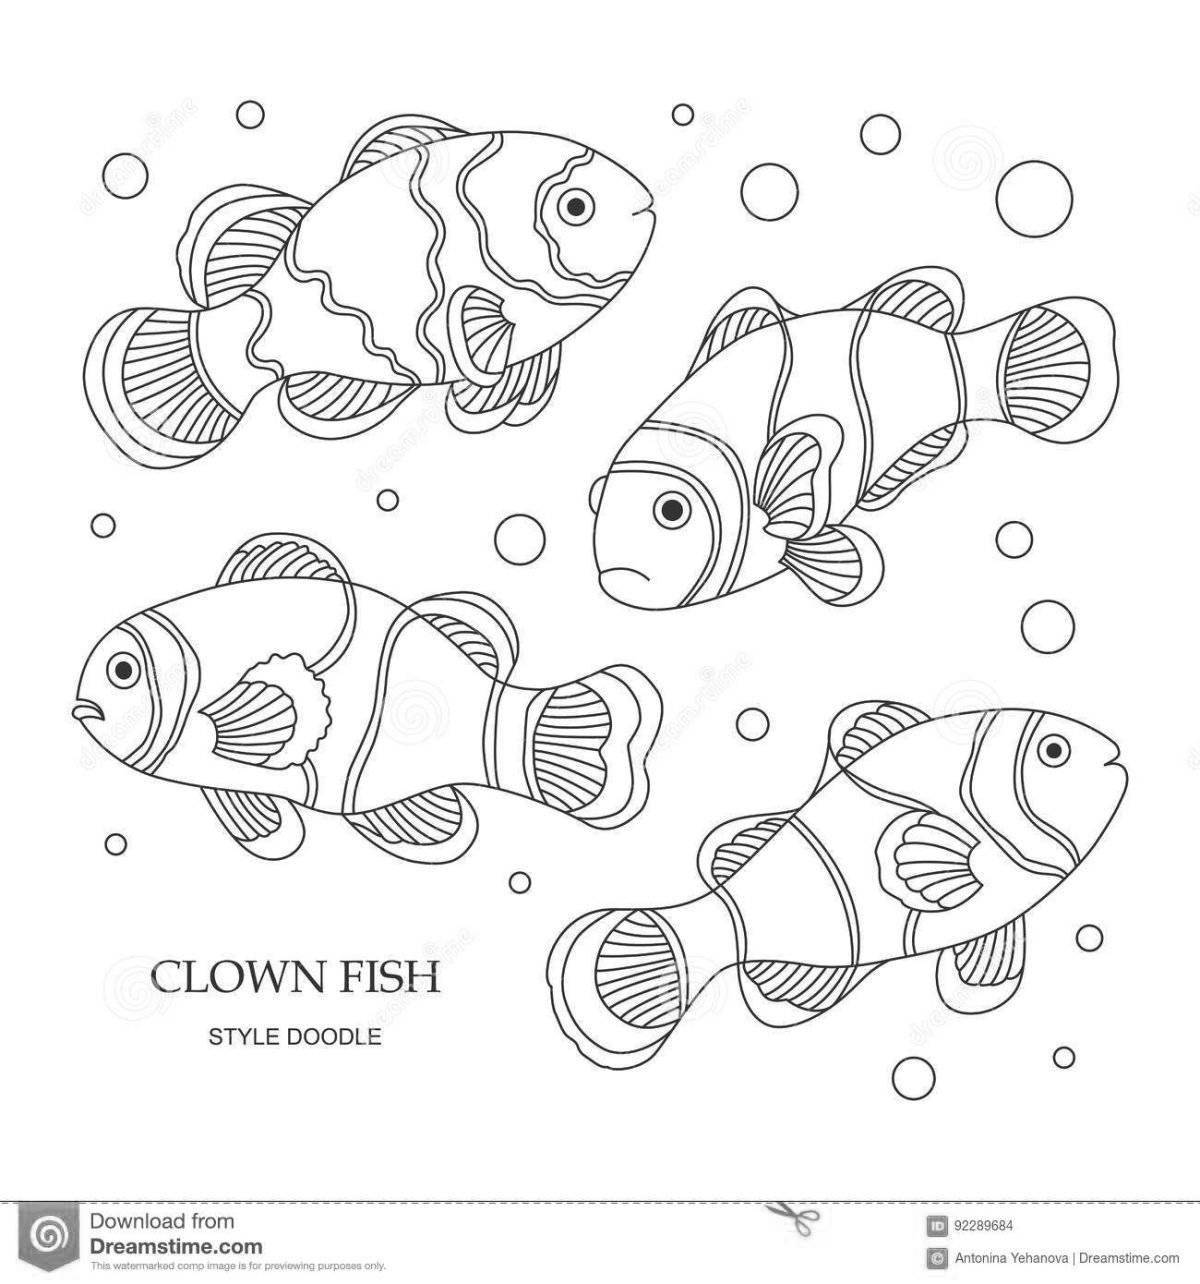 Fun clownfish coloring page for kids